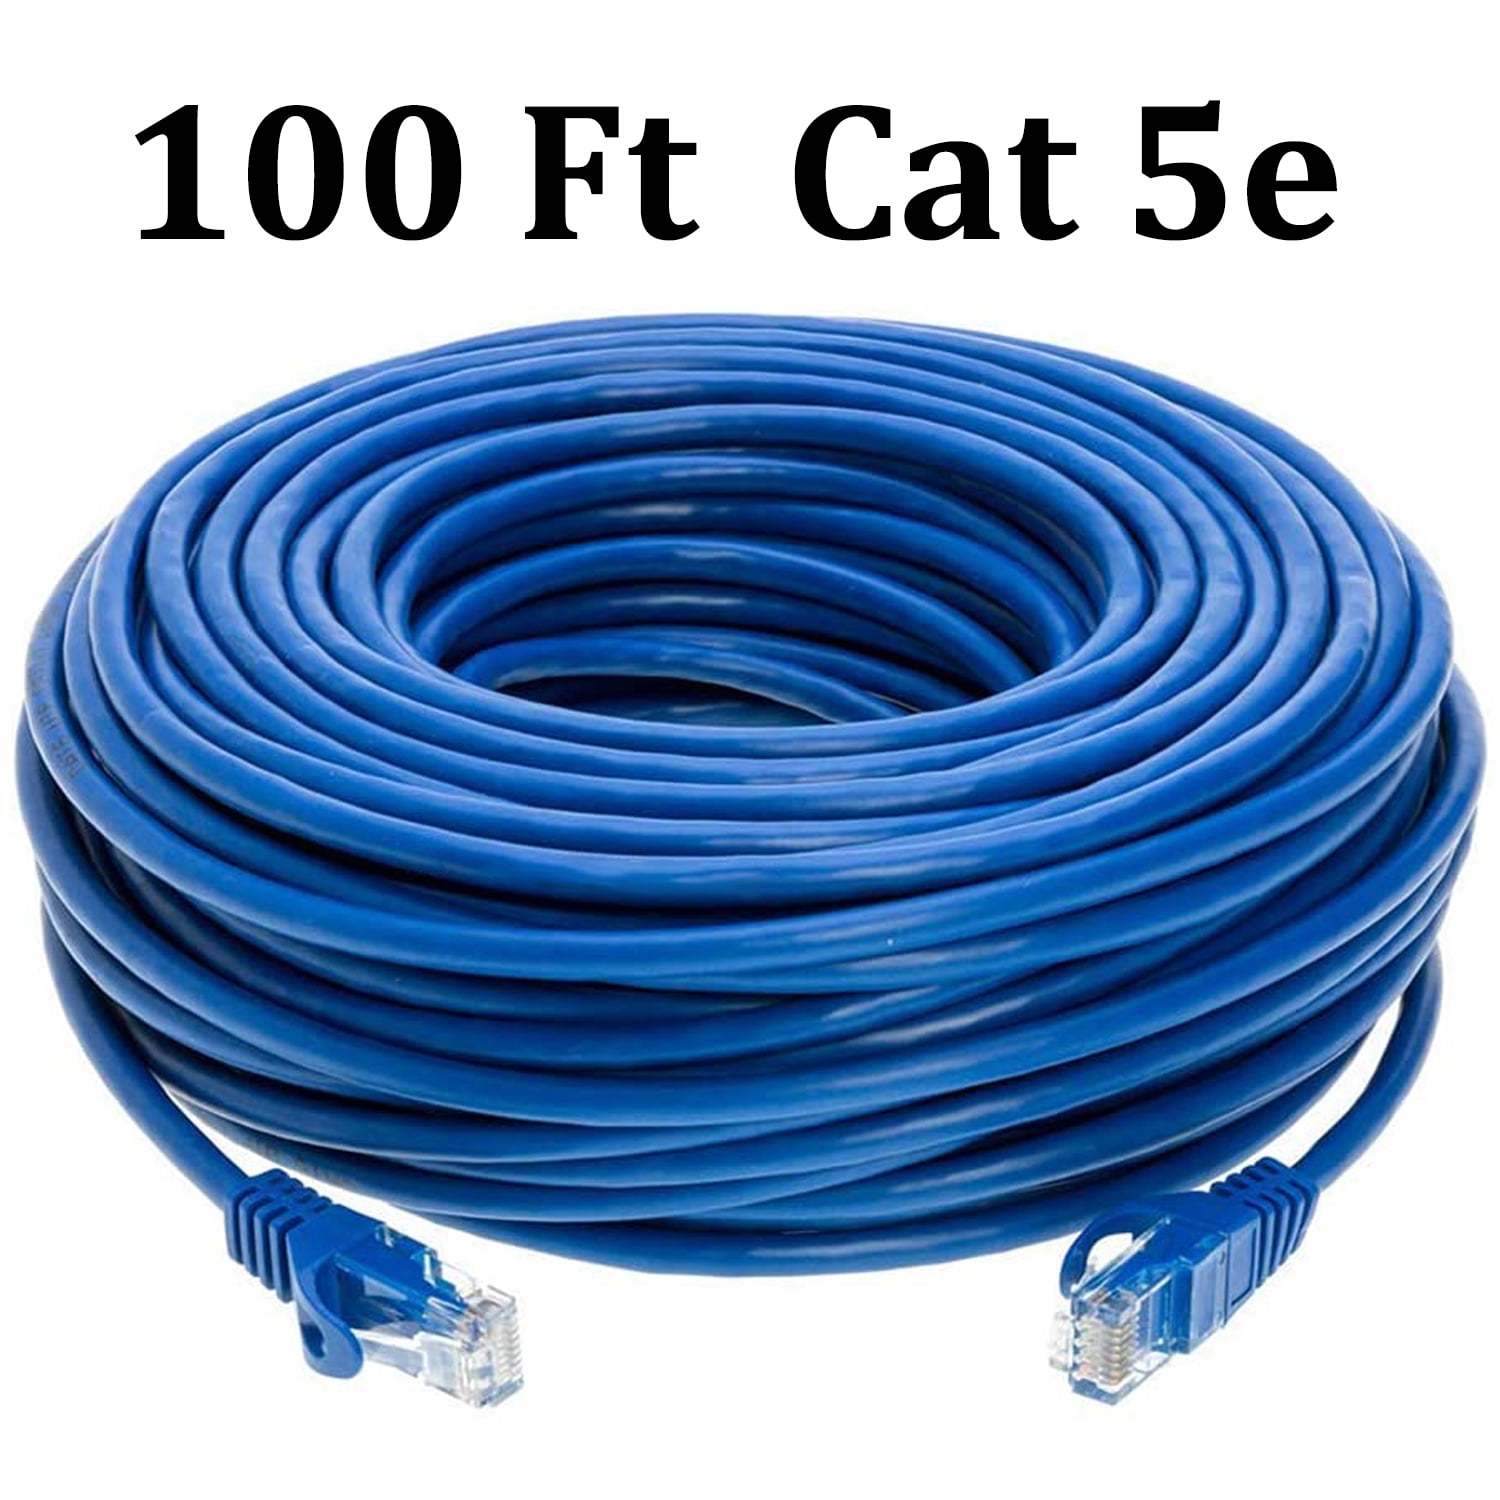 LONG 25FT 50FT 75FT 100FT Cat6 Cat5 Cat5e Ethernet Cable Cord Wire Brand New 